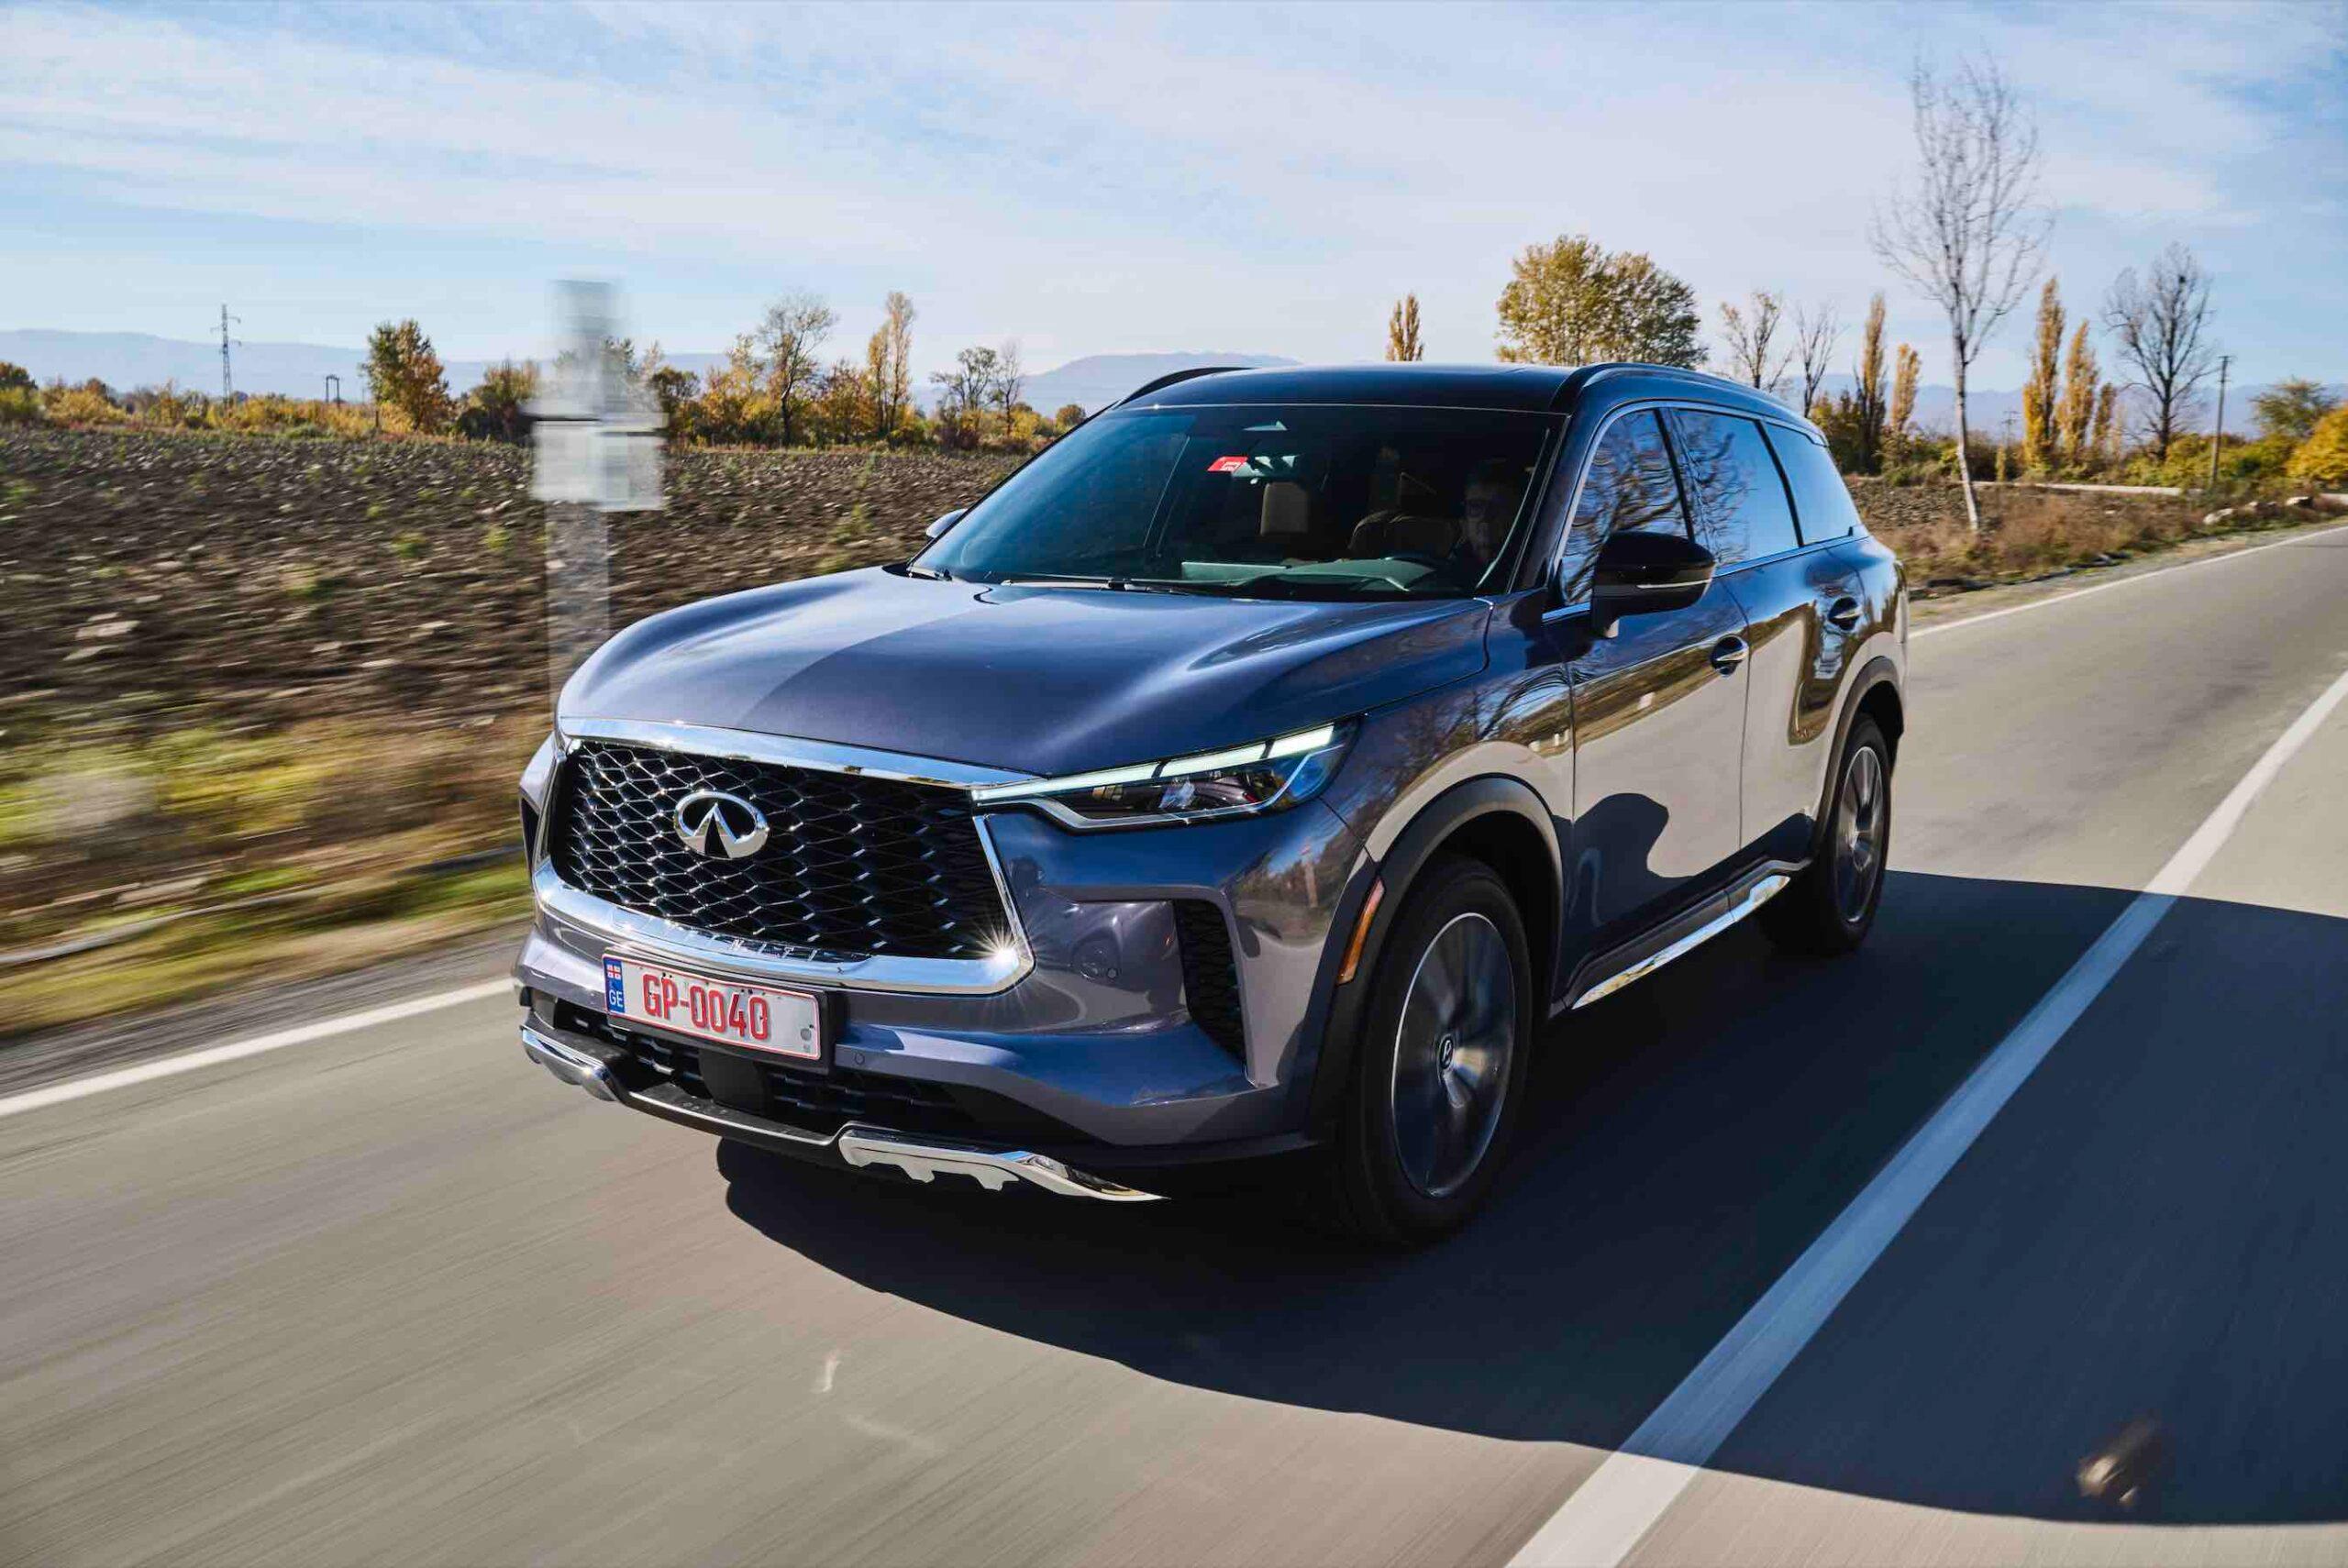 Georgian Heritage meets Japanese Innovation for the all-new Infiniti QX60 launch